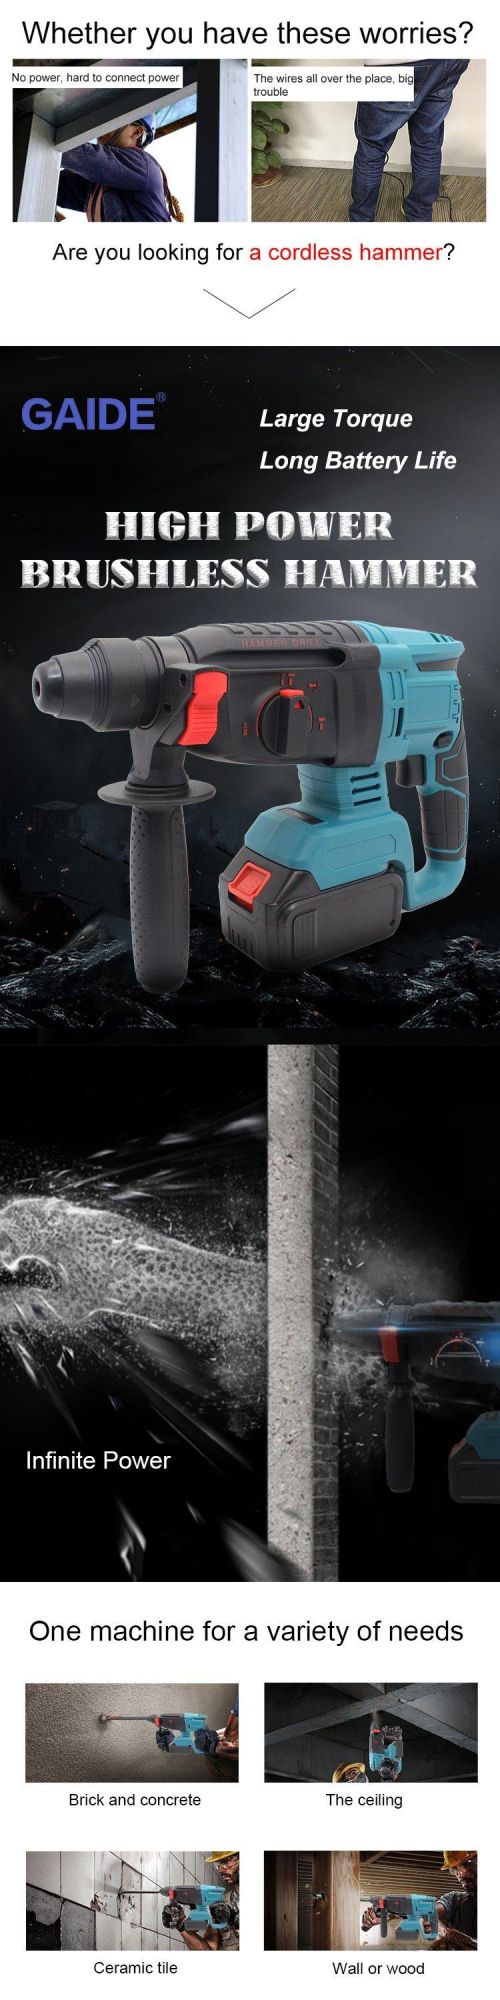 Power Tools Heavy Duty Drill Cordless Electric Hammer 21V Brushless Battery Hammer SDS Cordless